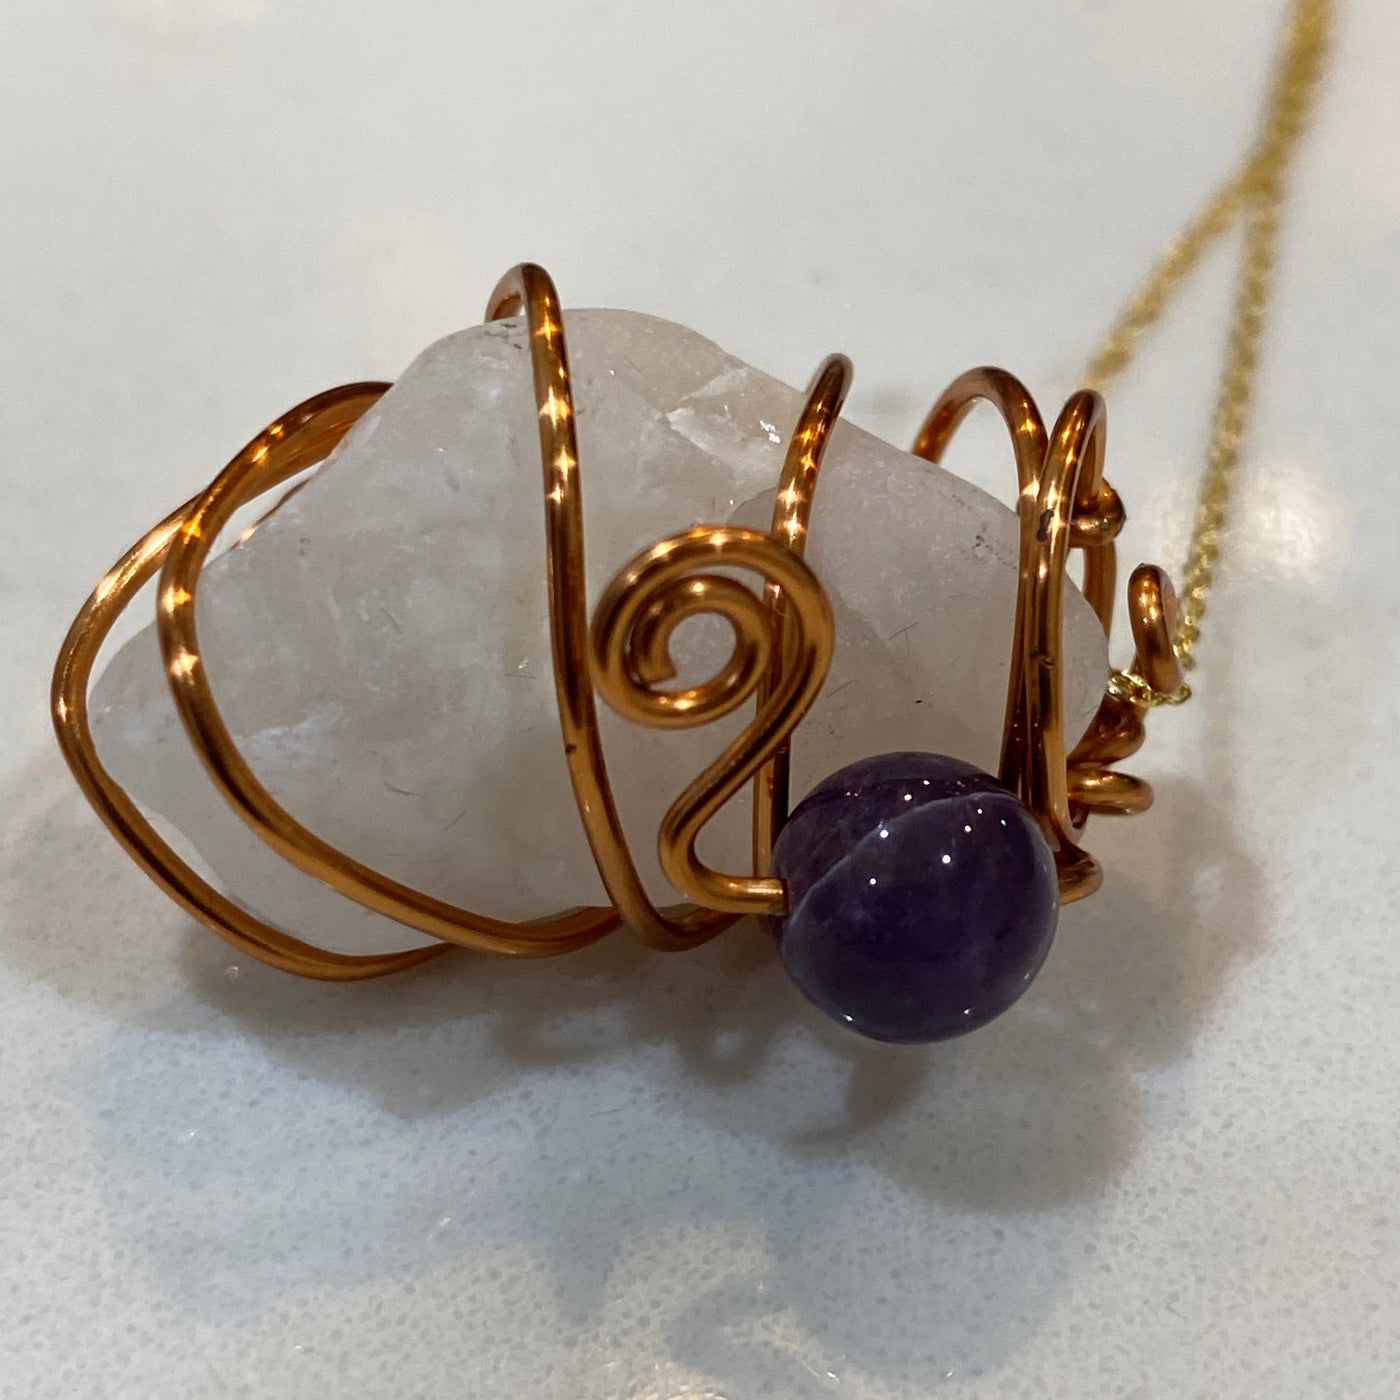 White natural stone, amethist and wire small pendant.